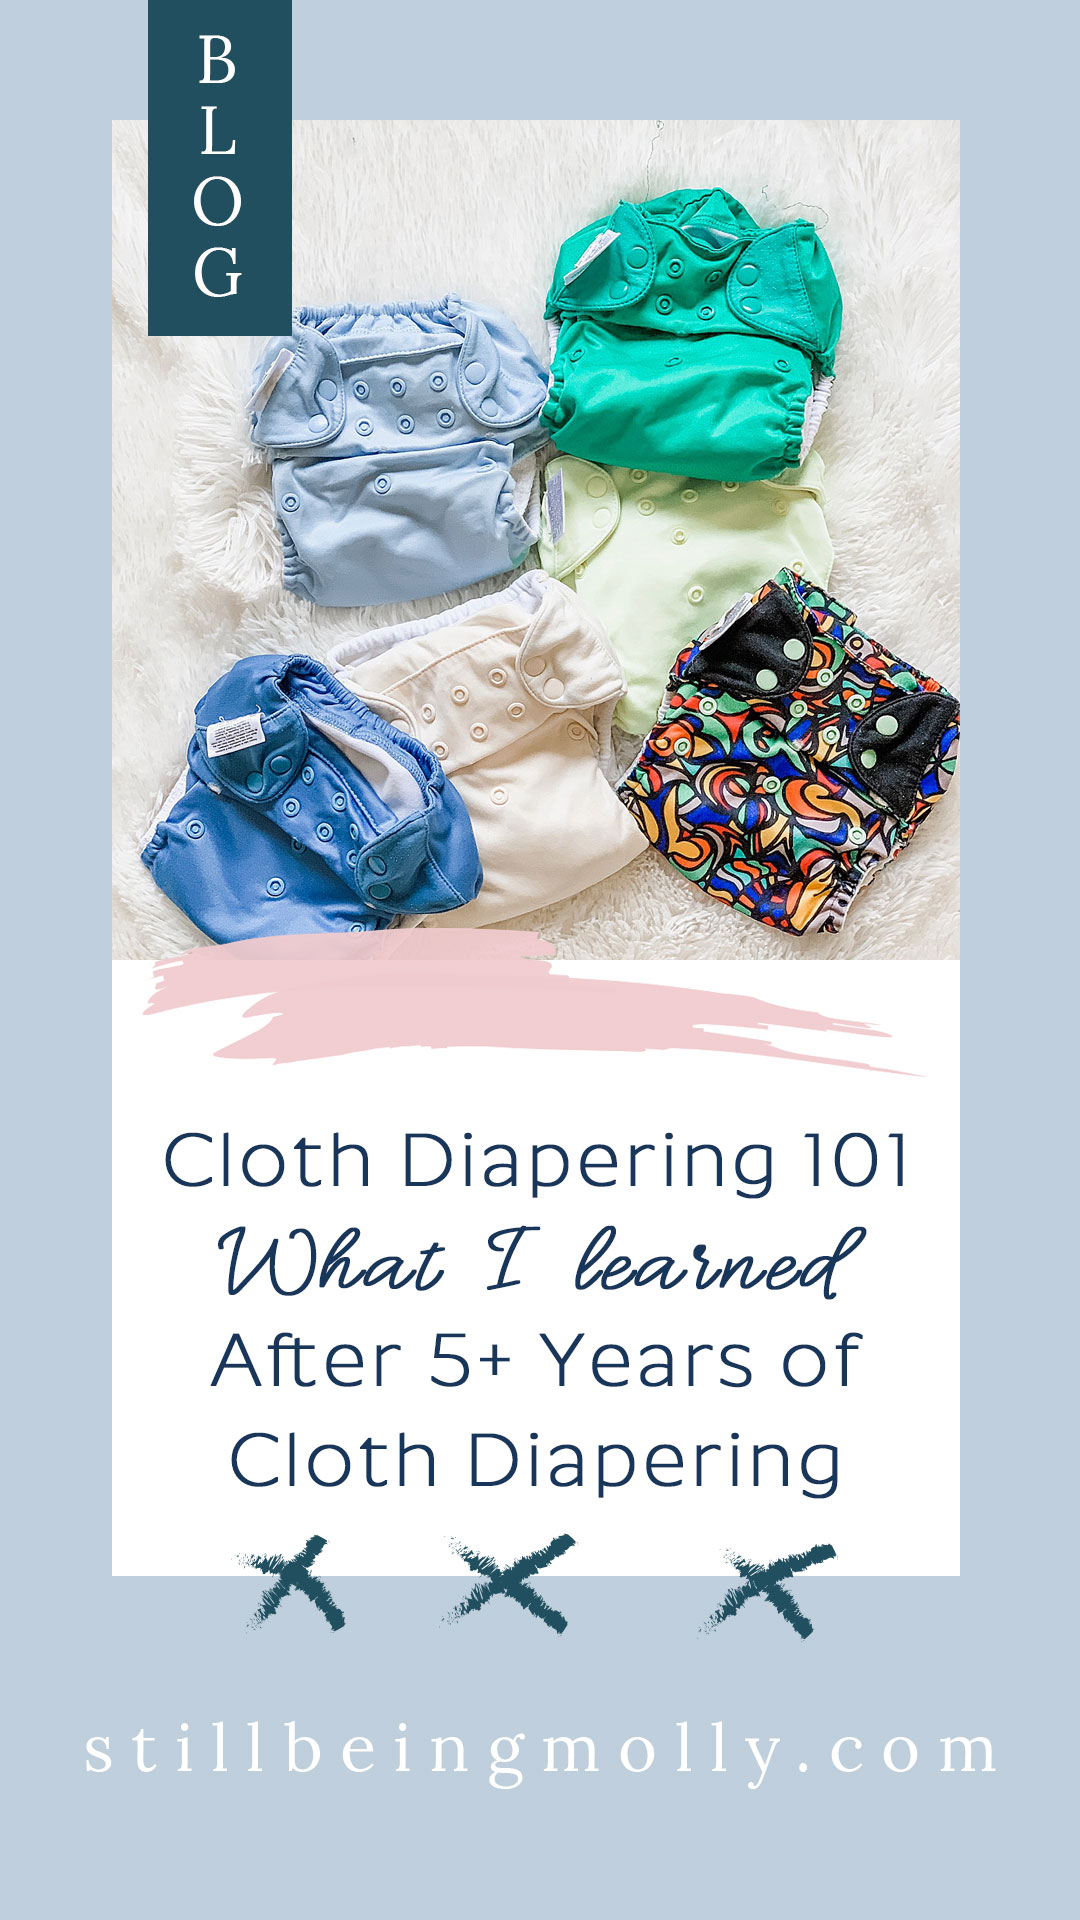 Cloth Diapering 101: What I Learned After 5+ Years of Cloth Diapering [UPDATED 2019]